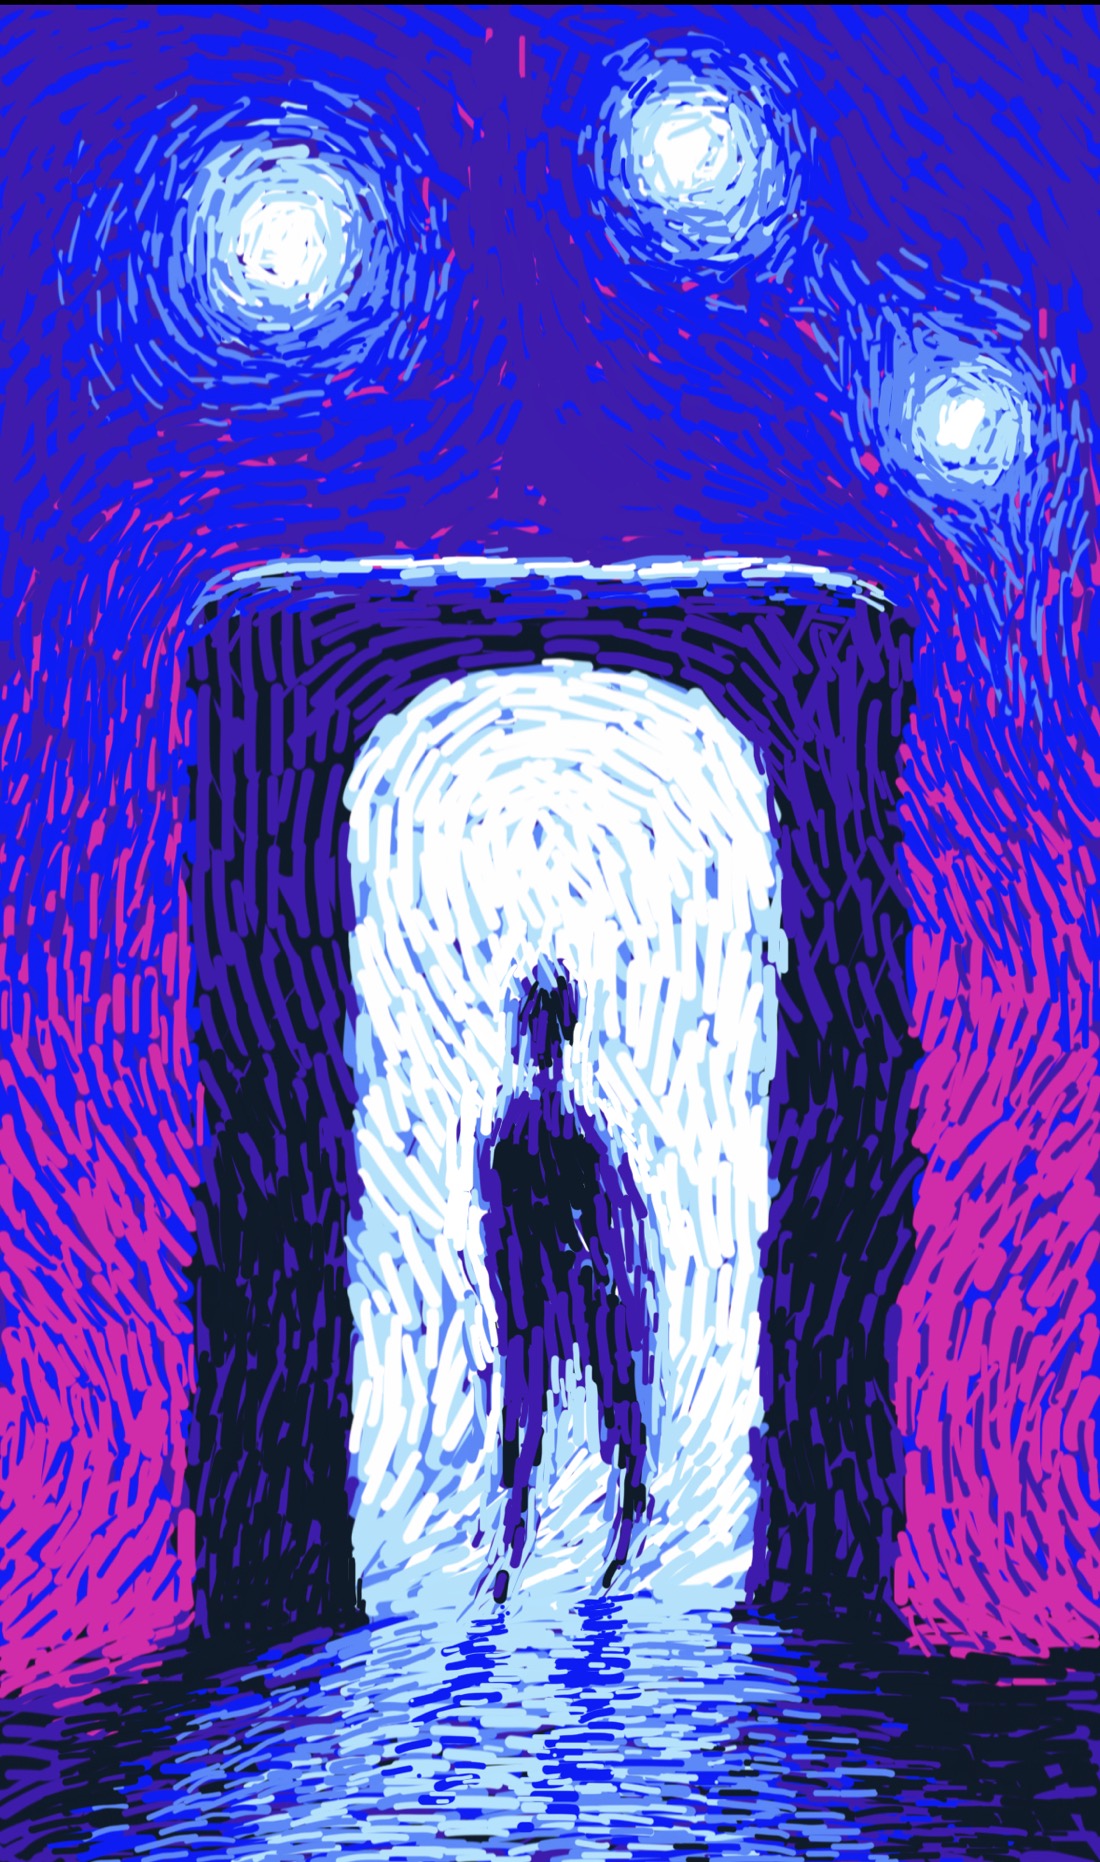 A night scene, with three blazing white objects in a dark indigo sky. The horizon is crimson. In the middle is an archway with light blazing from it, suggesting a portal or gateway of some sort. A figure stands in the archway, silhouetted in the white light.